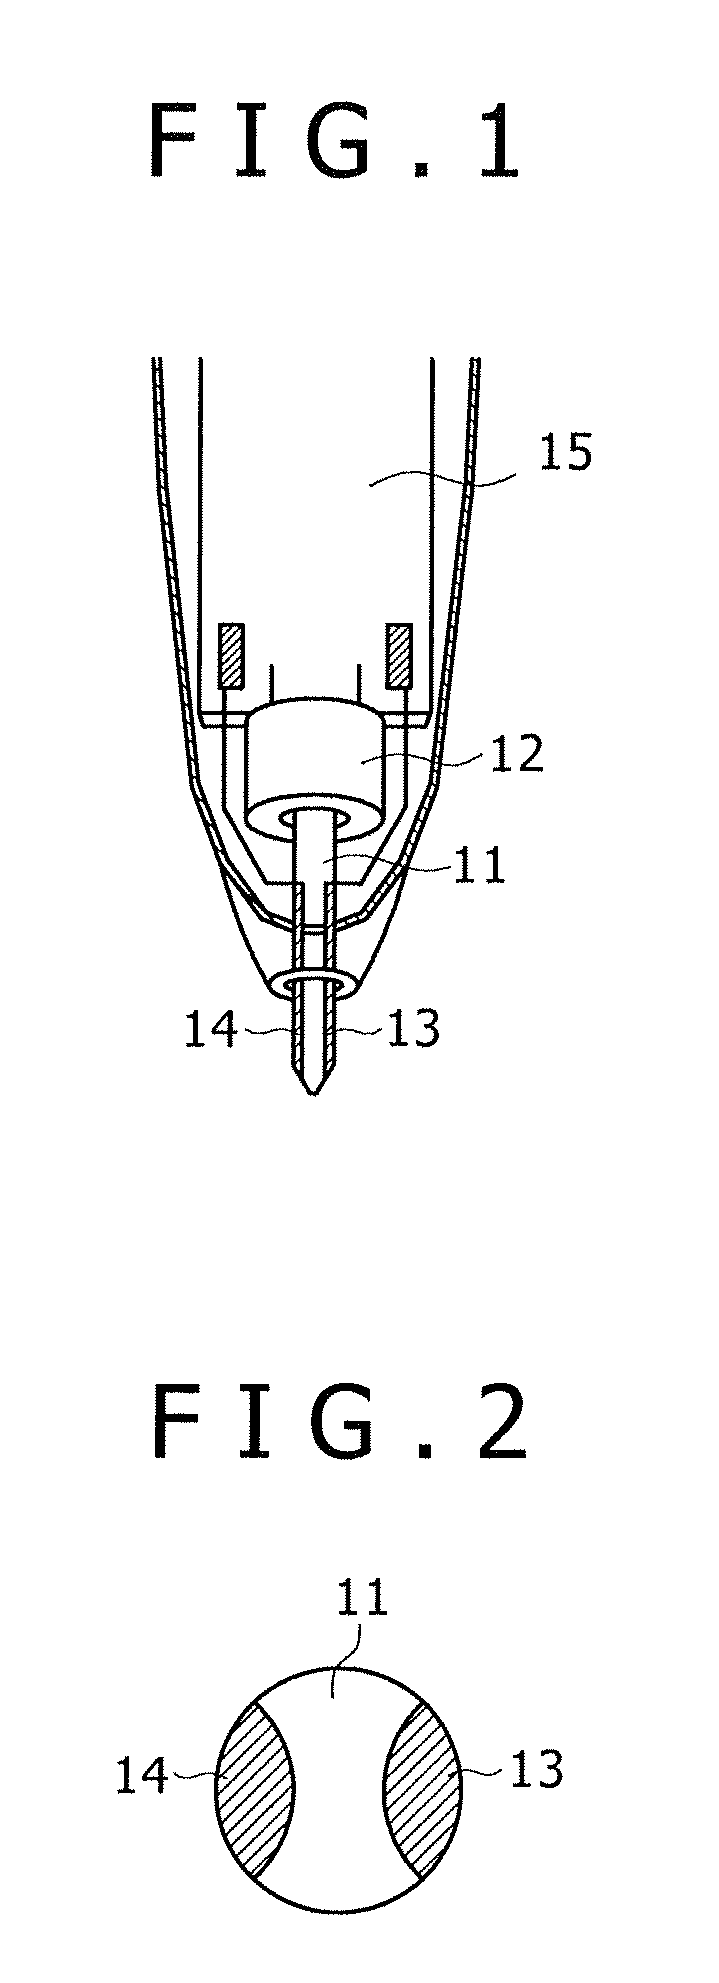 Position detecting device and position indicator thereof